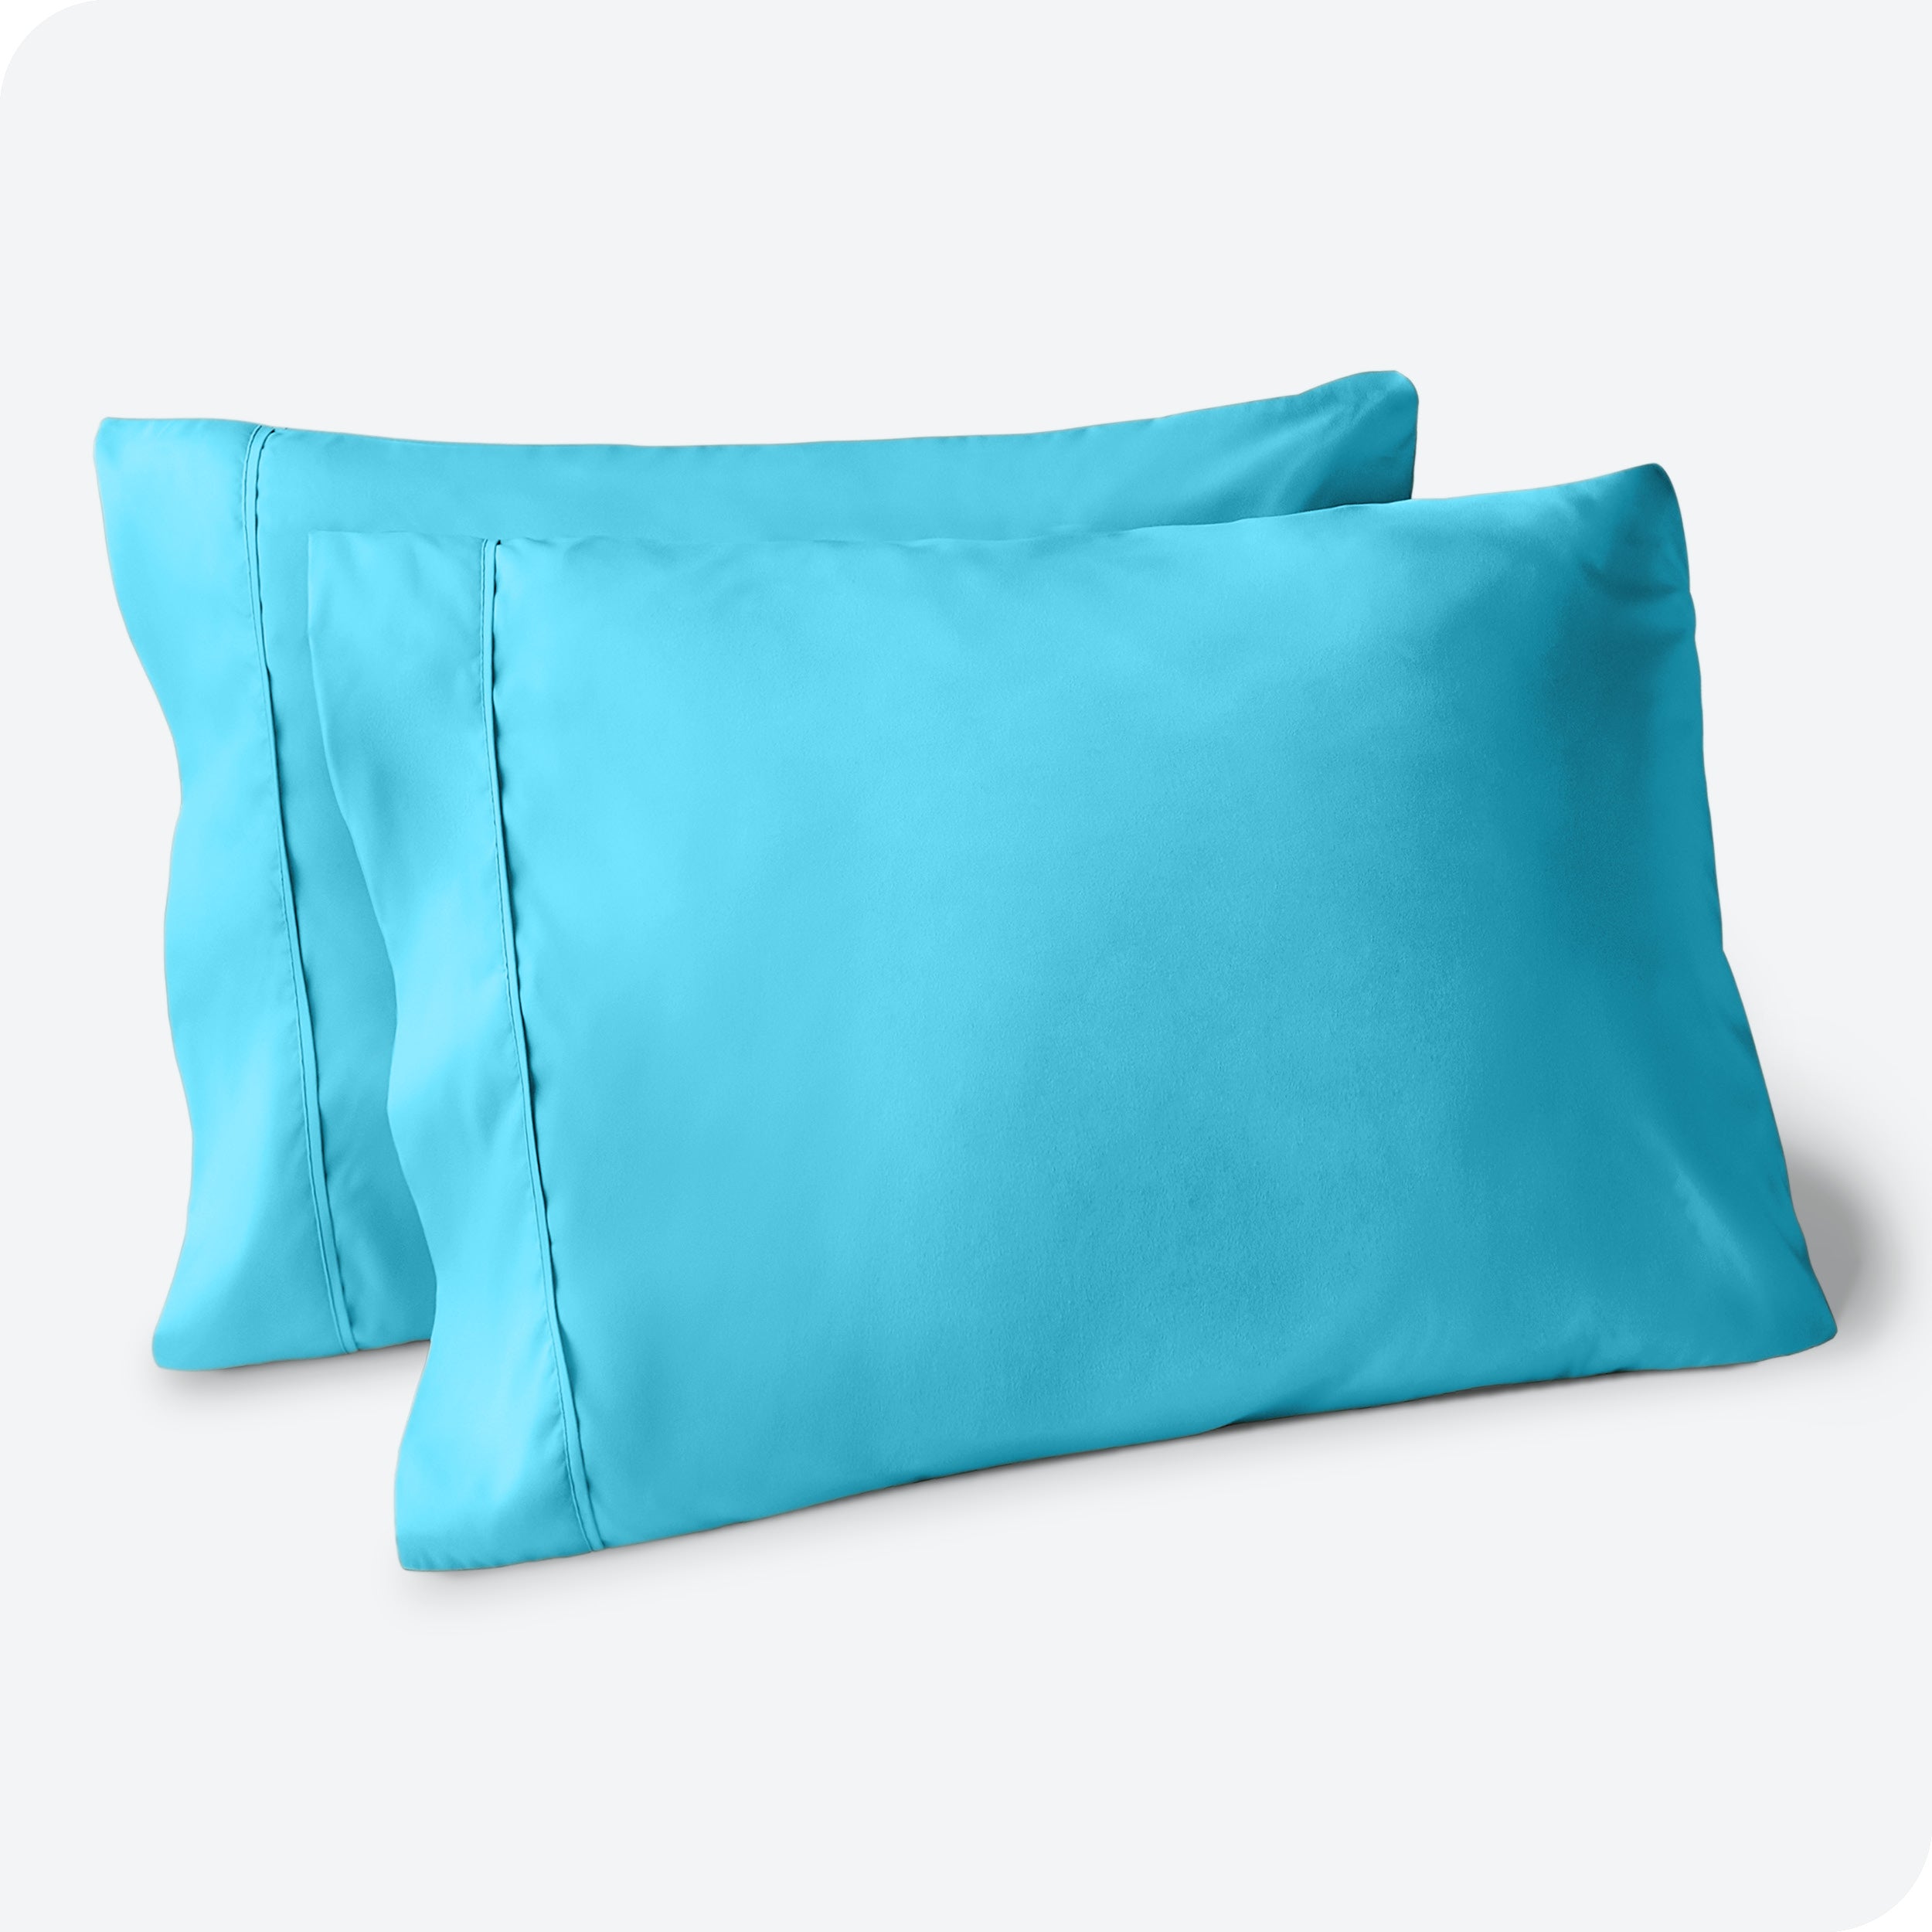 Two pillows on a white background with aqua pillowcases on them